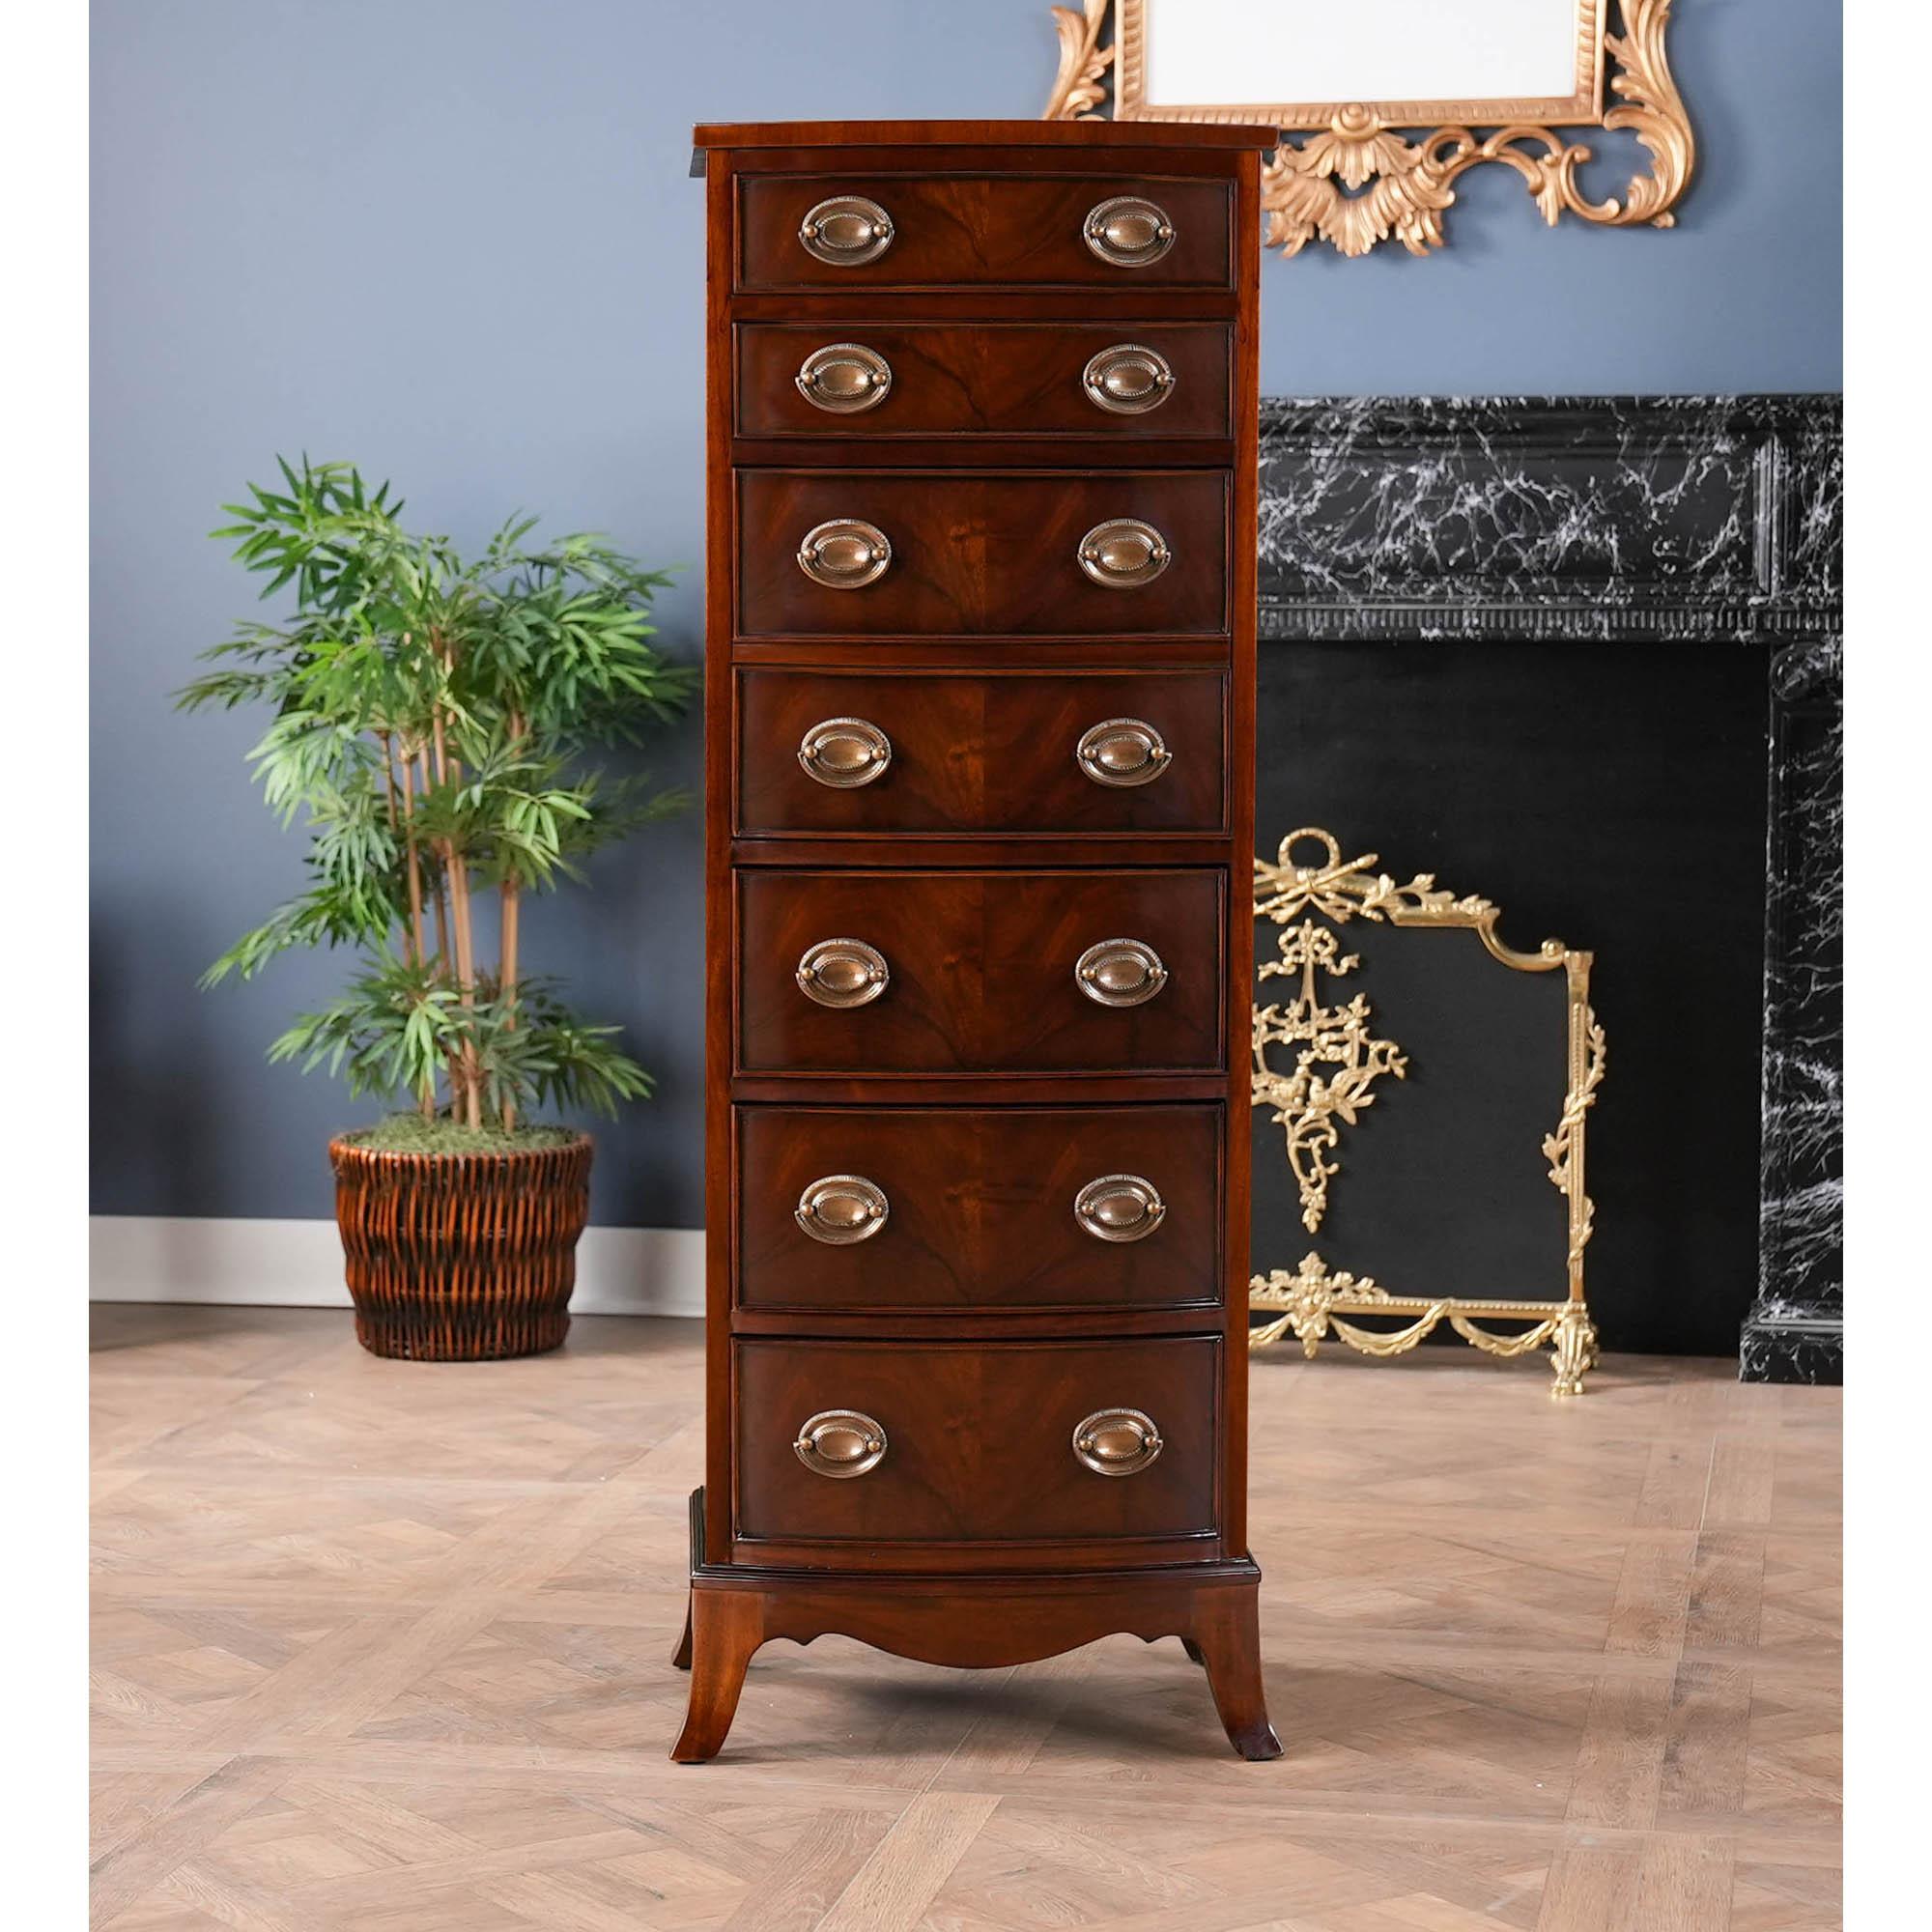 The Niagara Furniture Hidden Drawer Desk, a luxury piece of fine furniture with a hidden surprise inside. This tall chest was originally designed for lingerie but we have redesigned it to hold a small writing desk with a small drawer, and storage